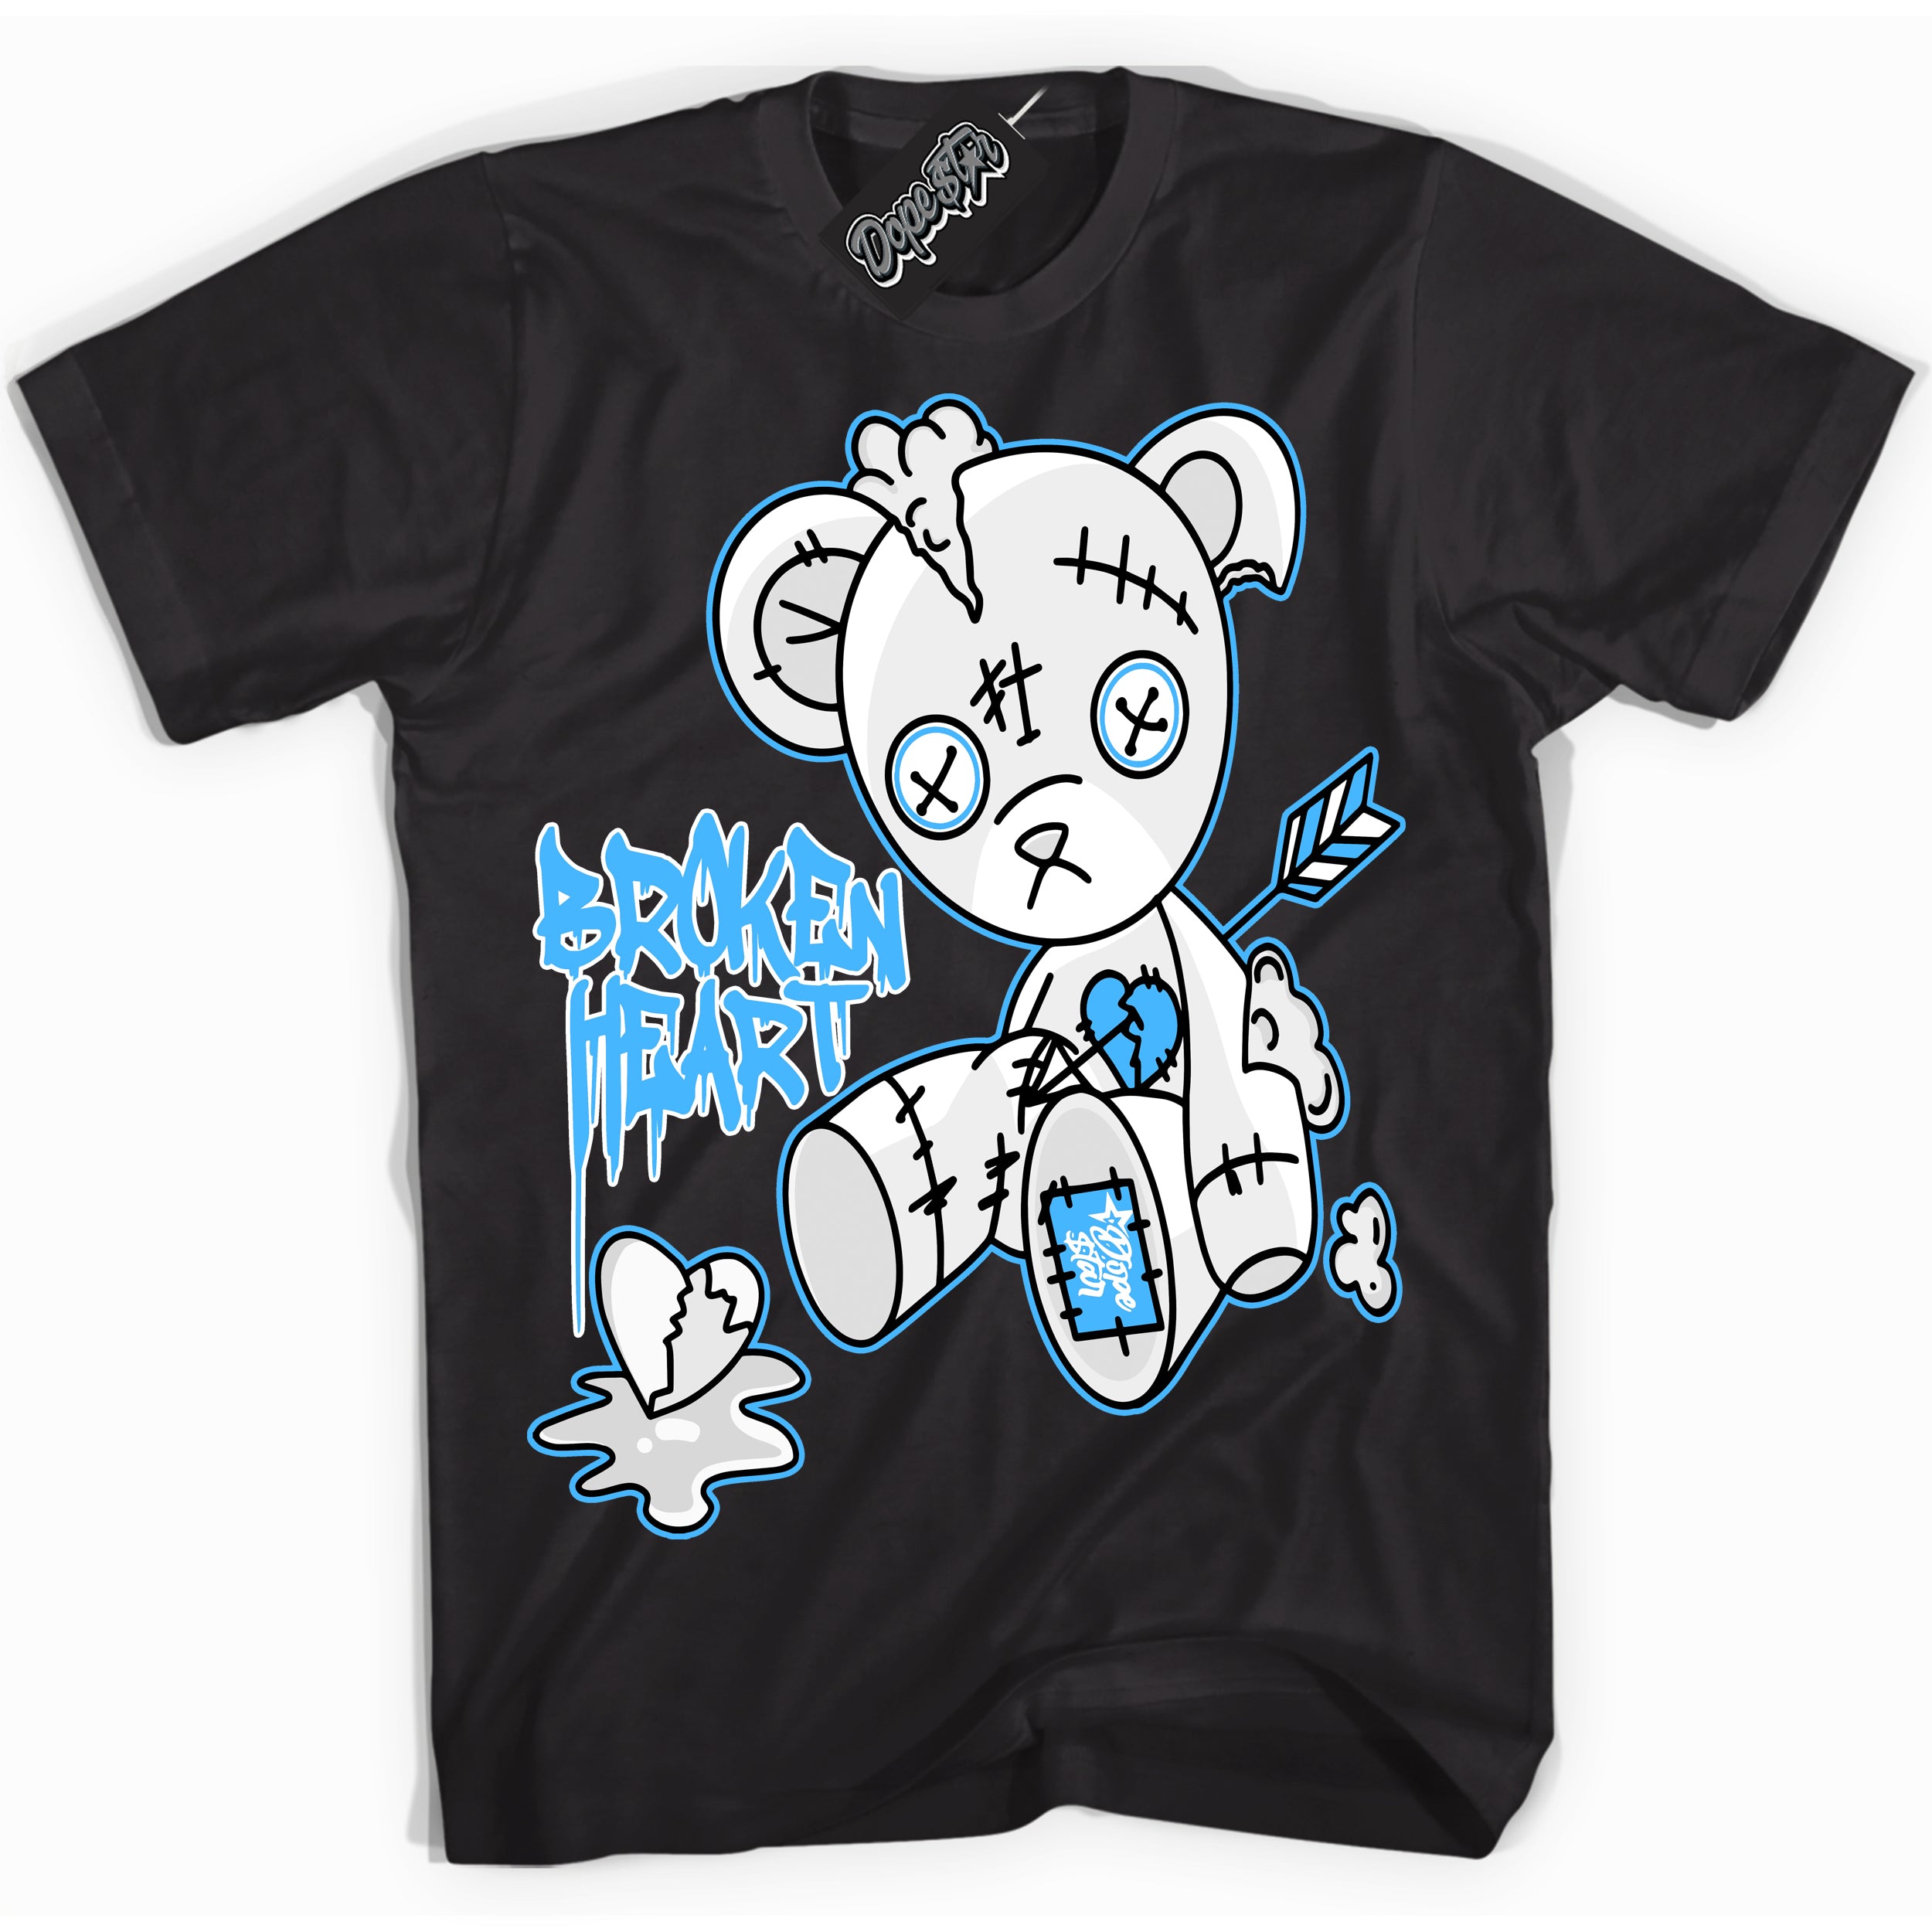 Cool Black graphic tee with “ Broken Heart Bear ” design, that perfectly matches Powder Blue 9s sneakers 